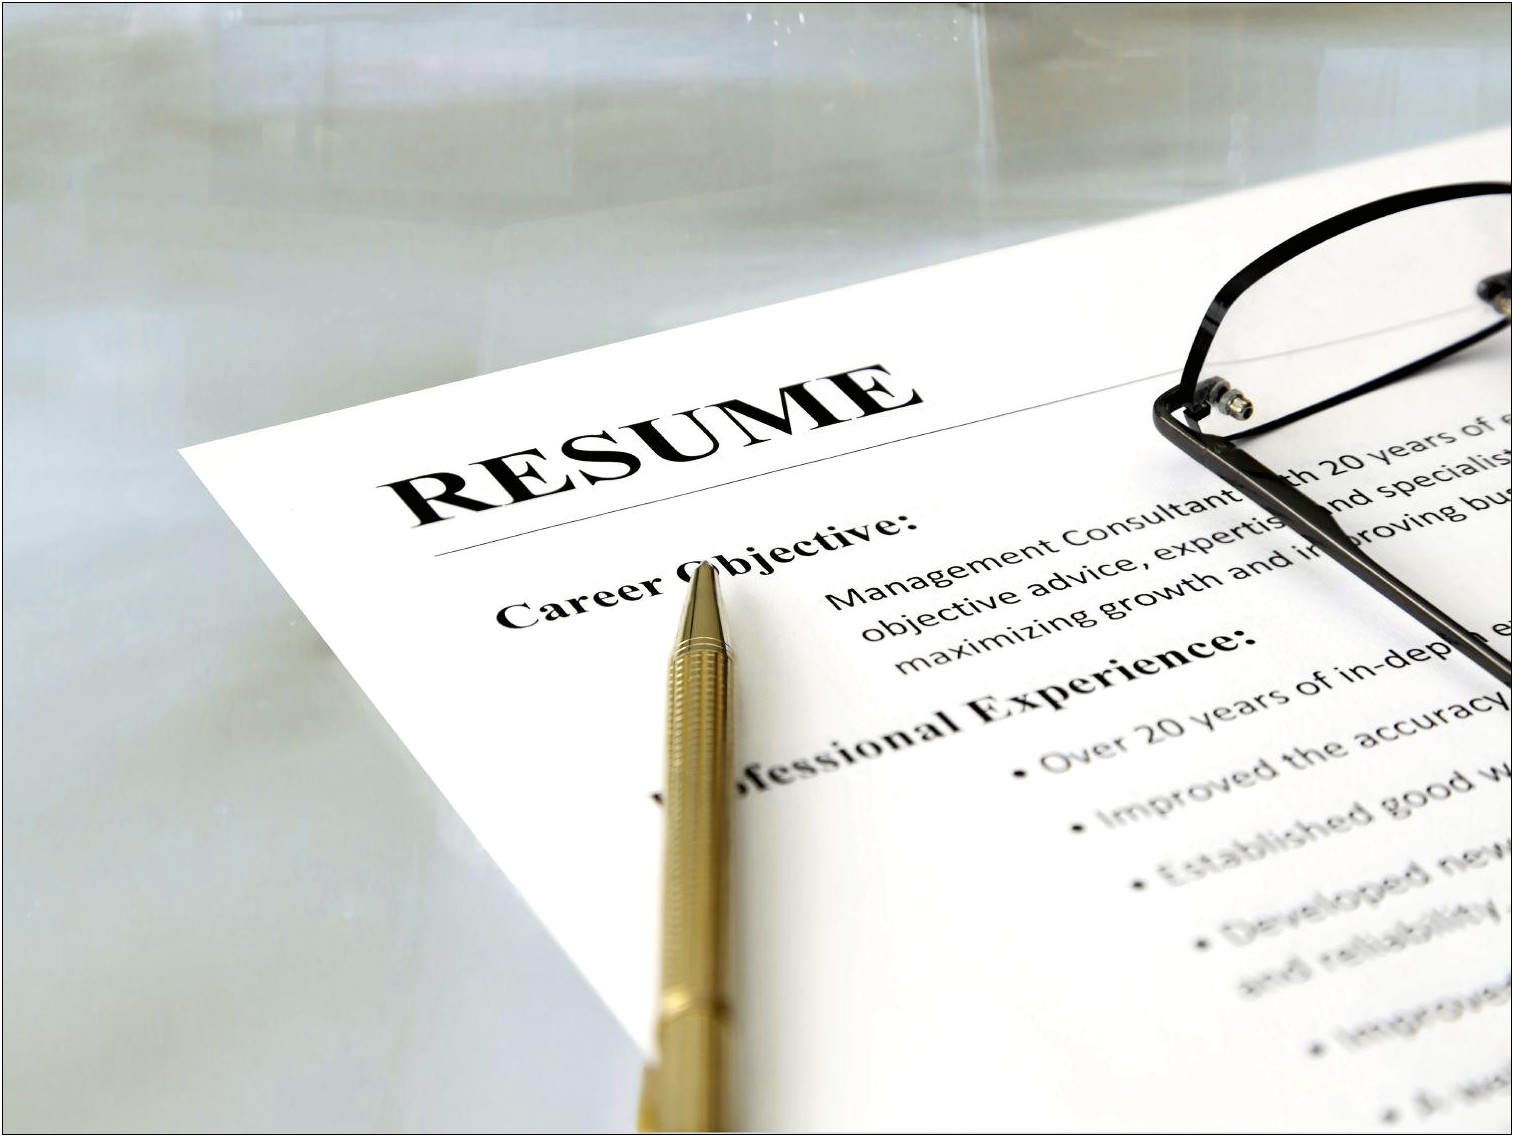 Writing A Resume Objective For Teaching